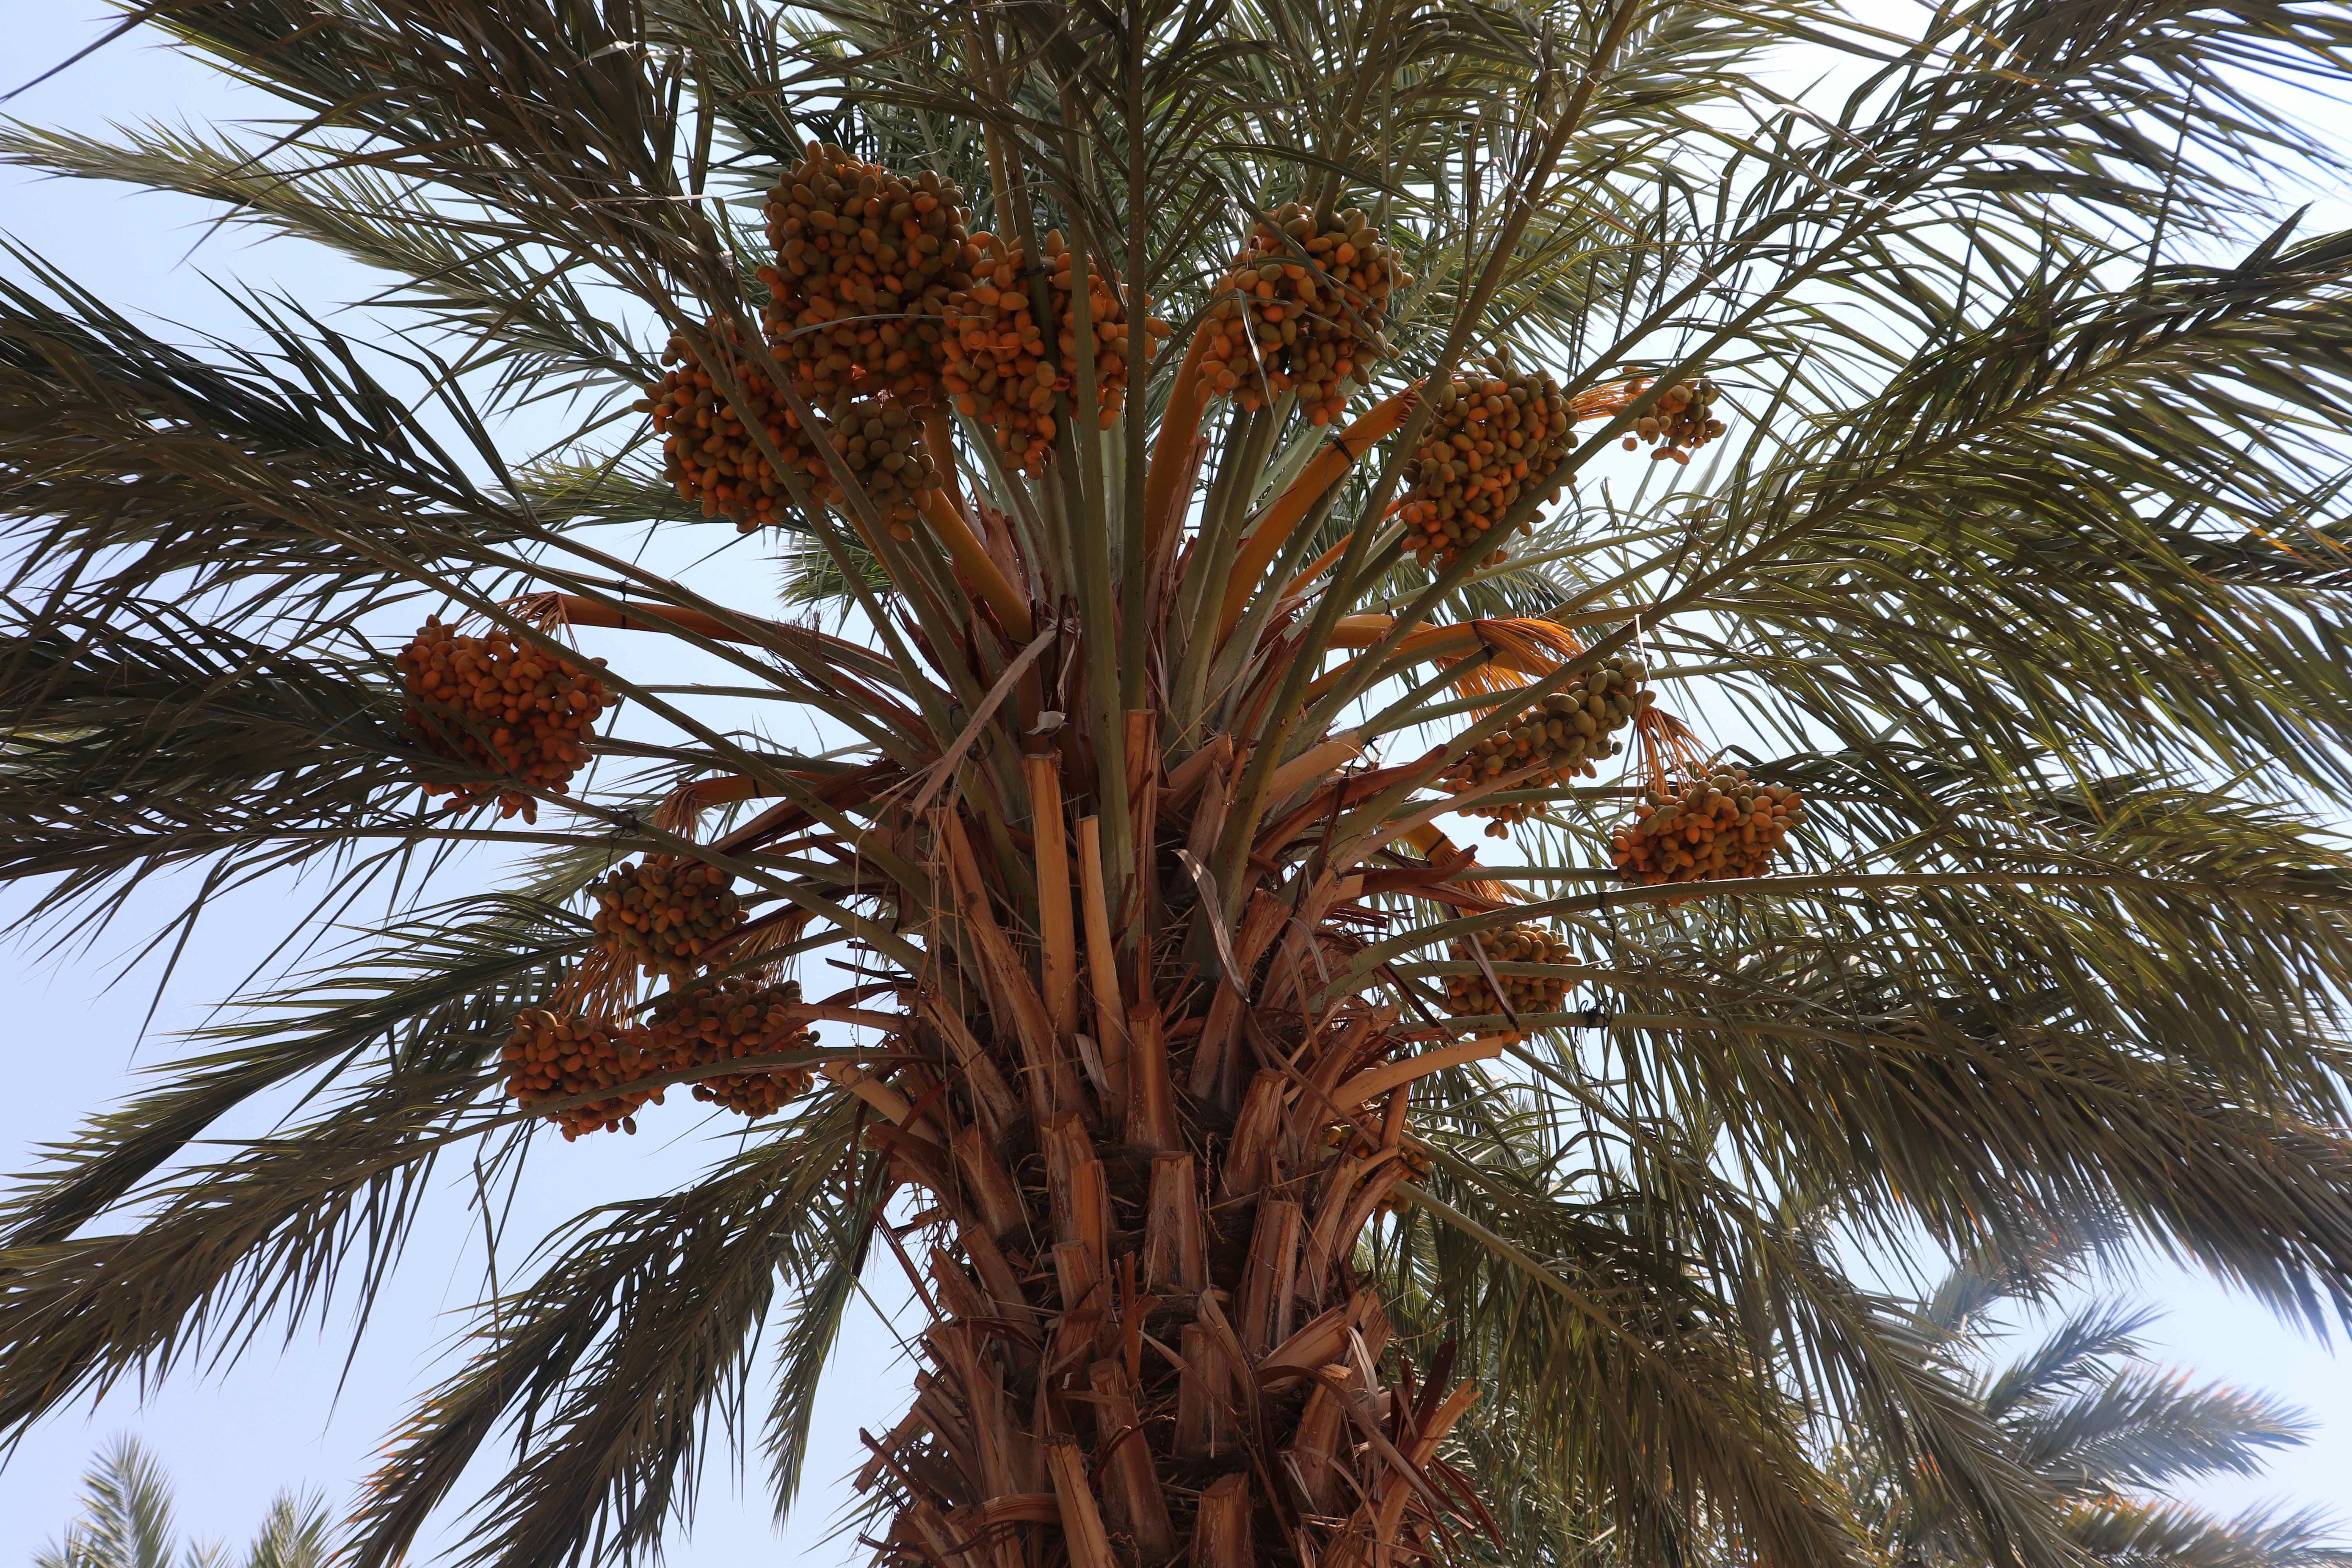 Young dates on Jamileh's palm tree farm. In about one month, she will need to put netting around them as they start to turn brown in order to prevent them from falling to the ground. Image by Carly Graf. Palestine, 2019.